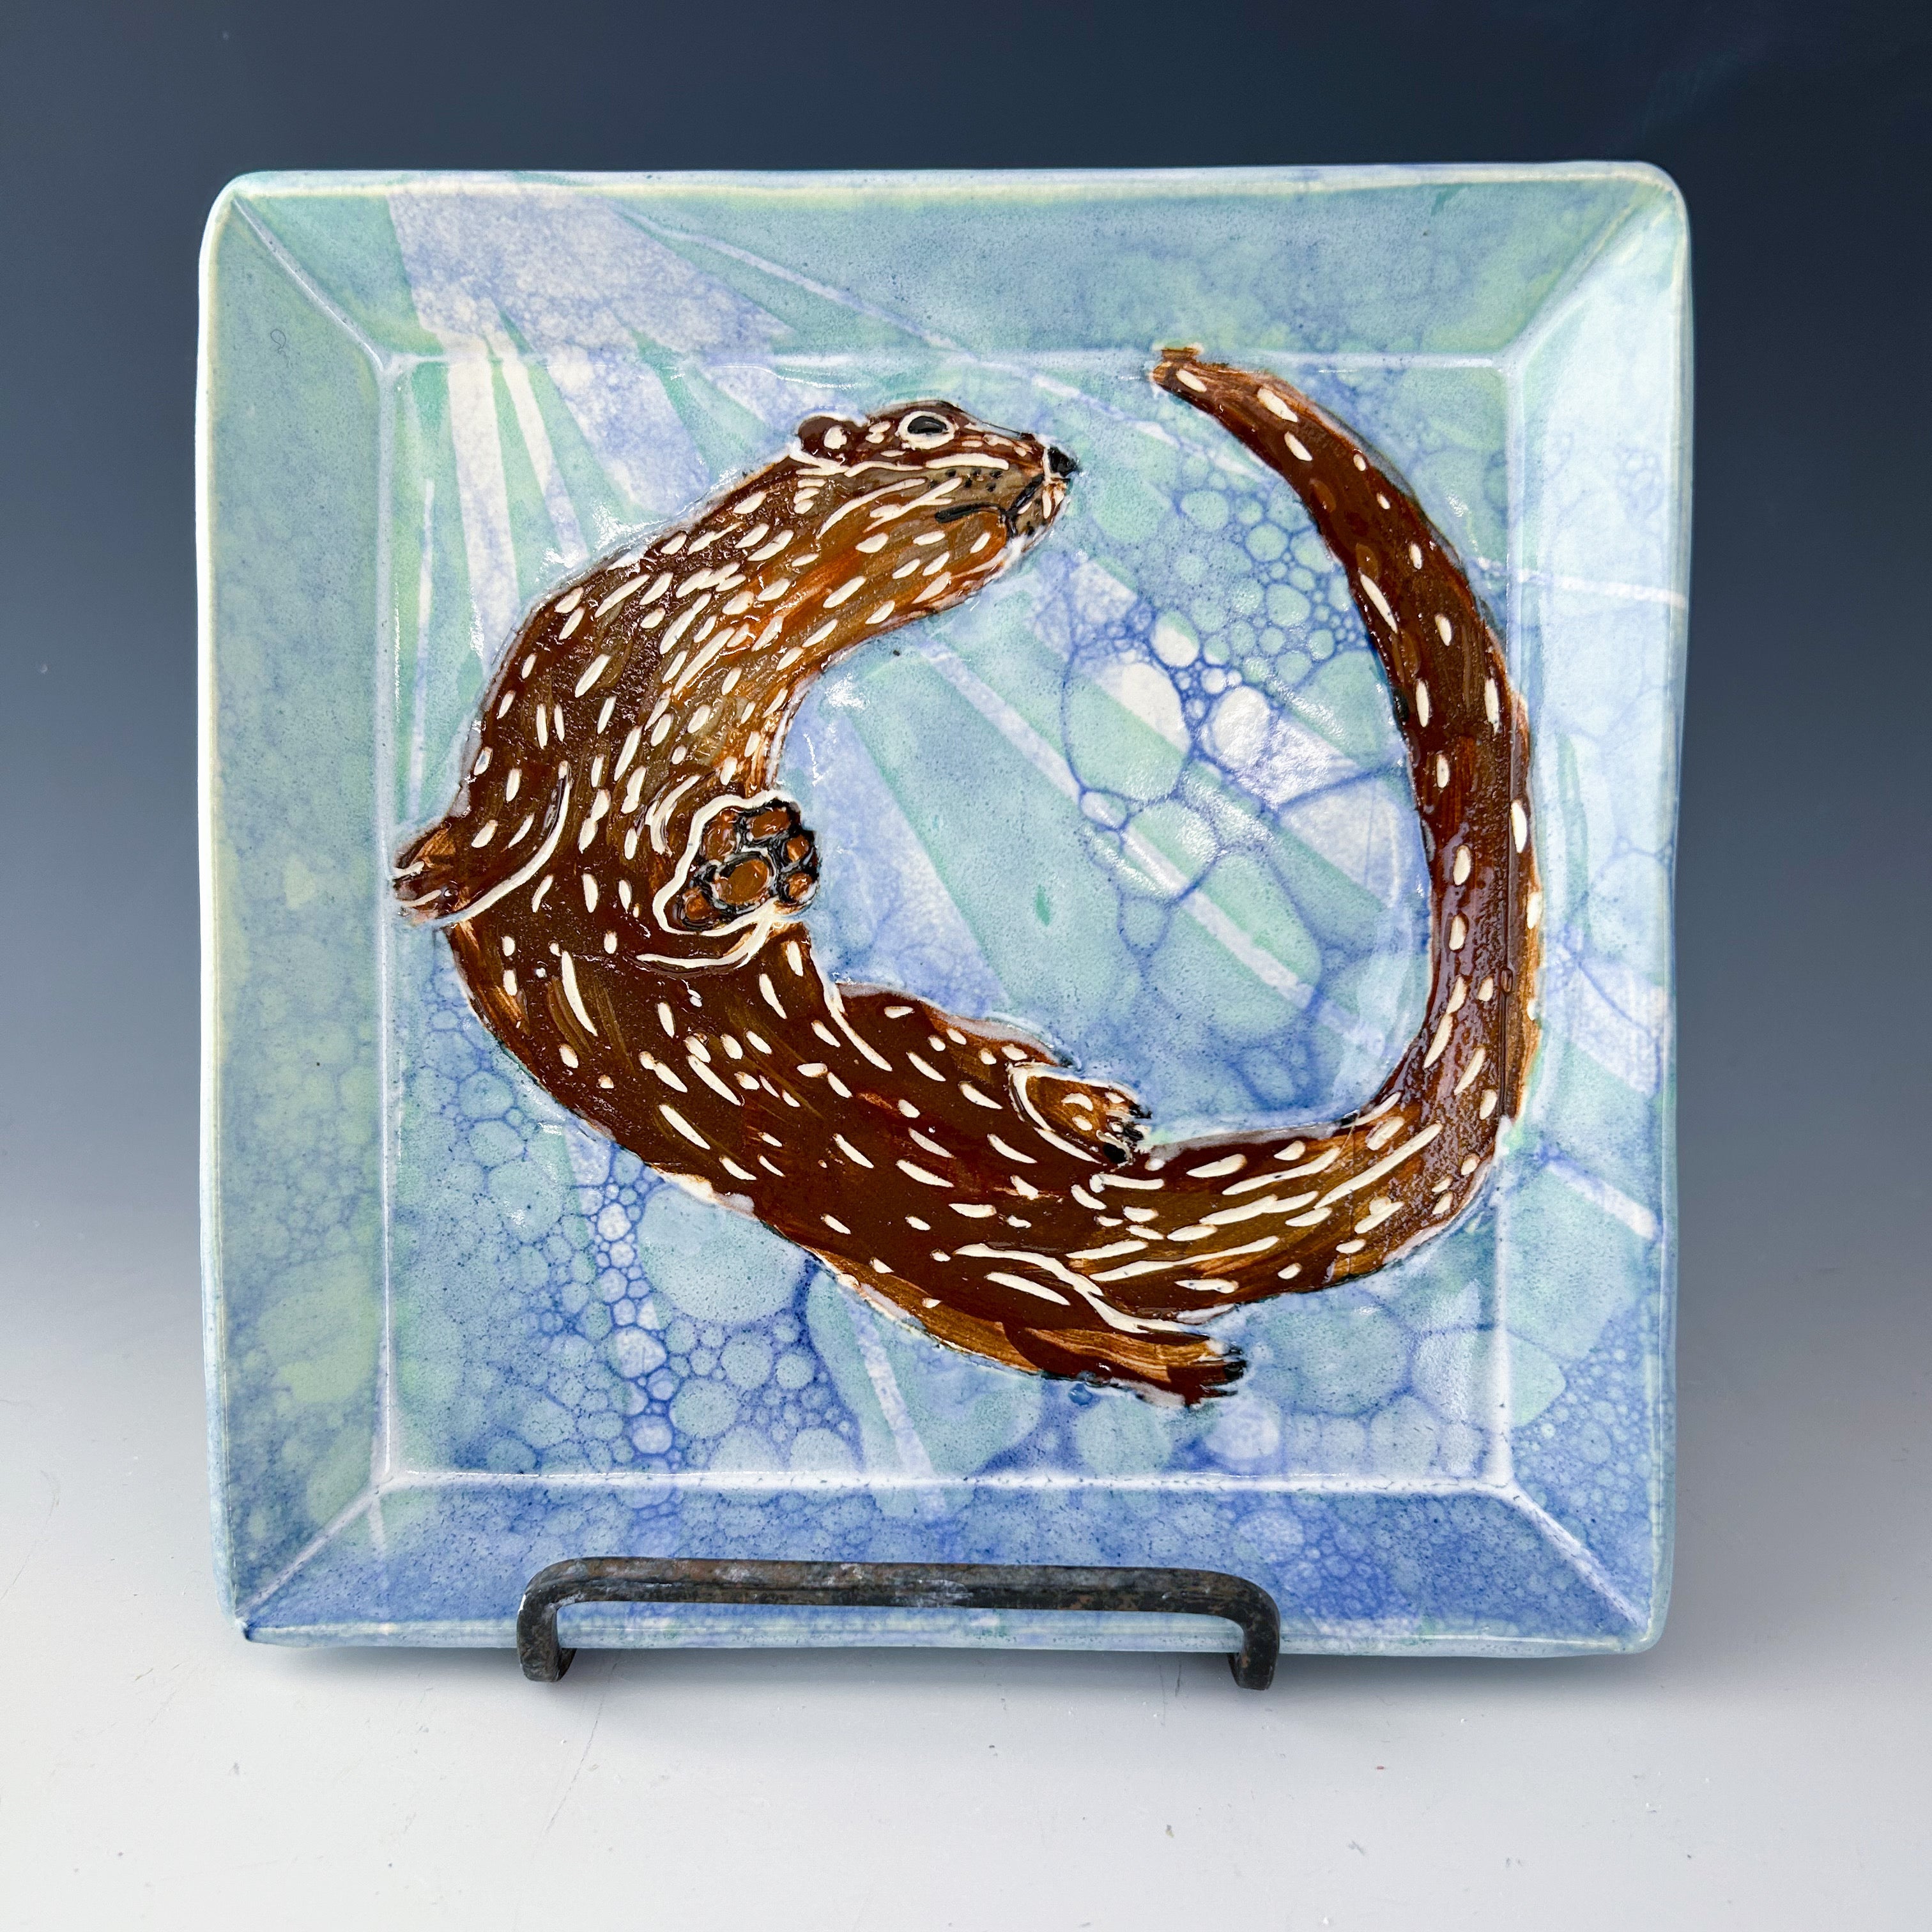 Otters Large Plate in Blue and Aqua